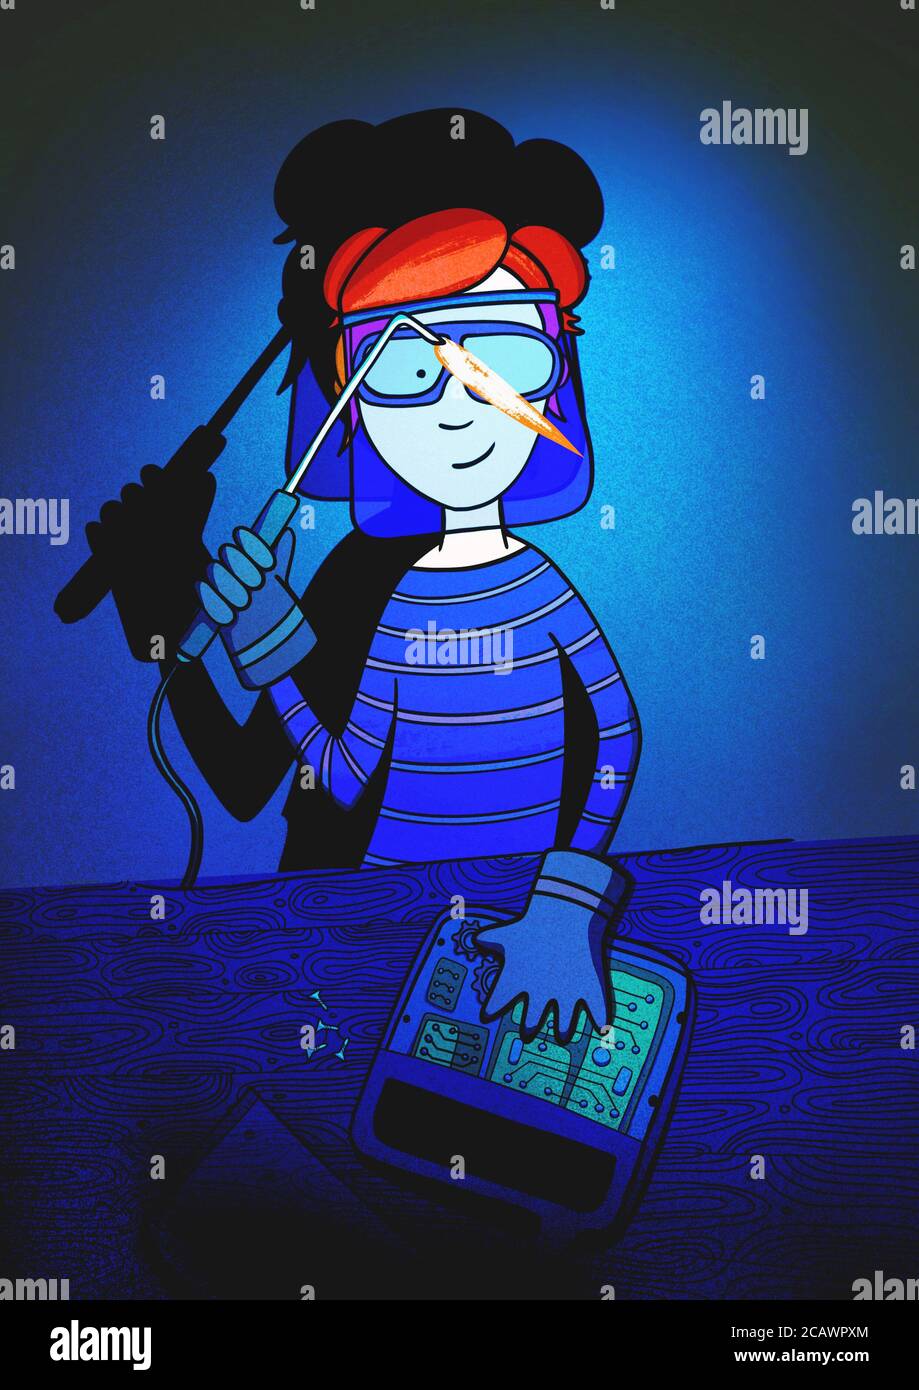 Illustration of redhead girl constructiong something with welder. Stock Photo